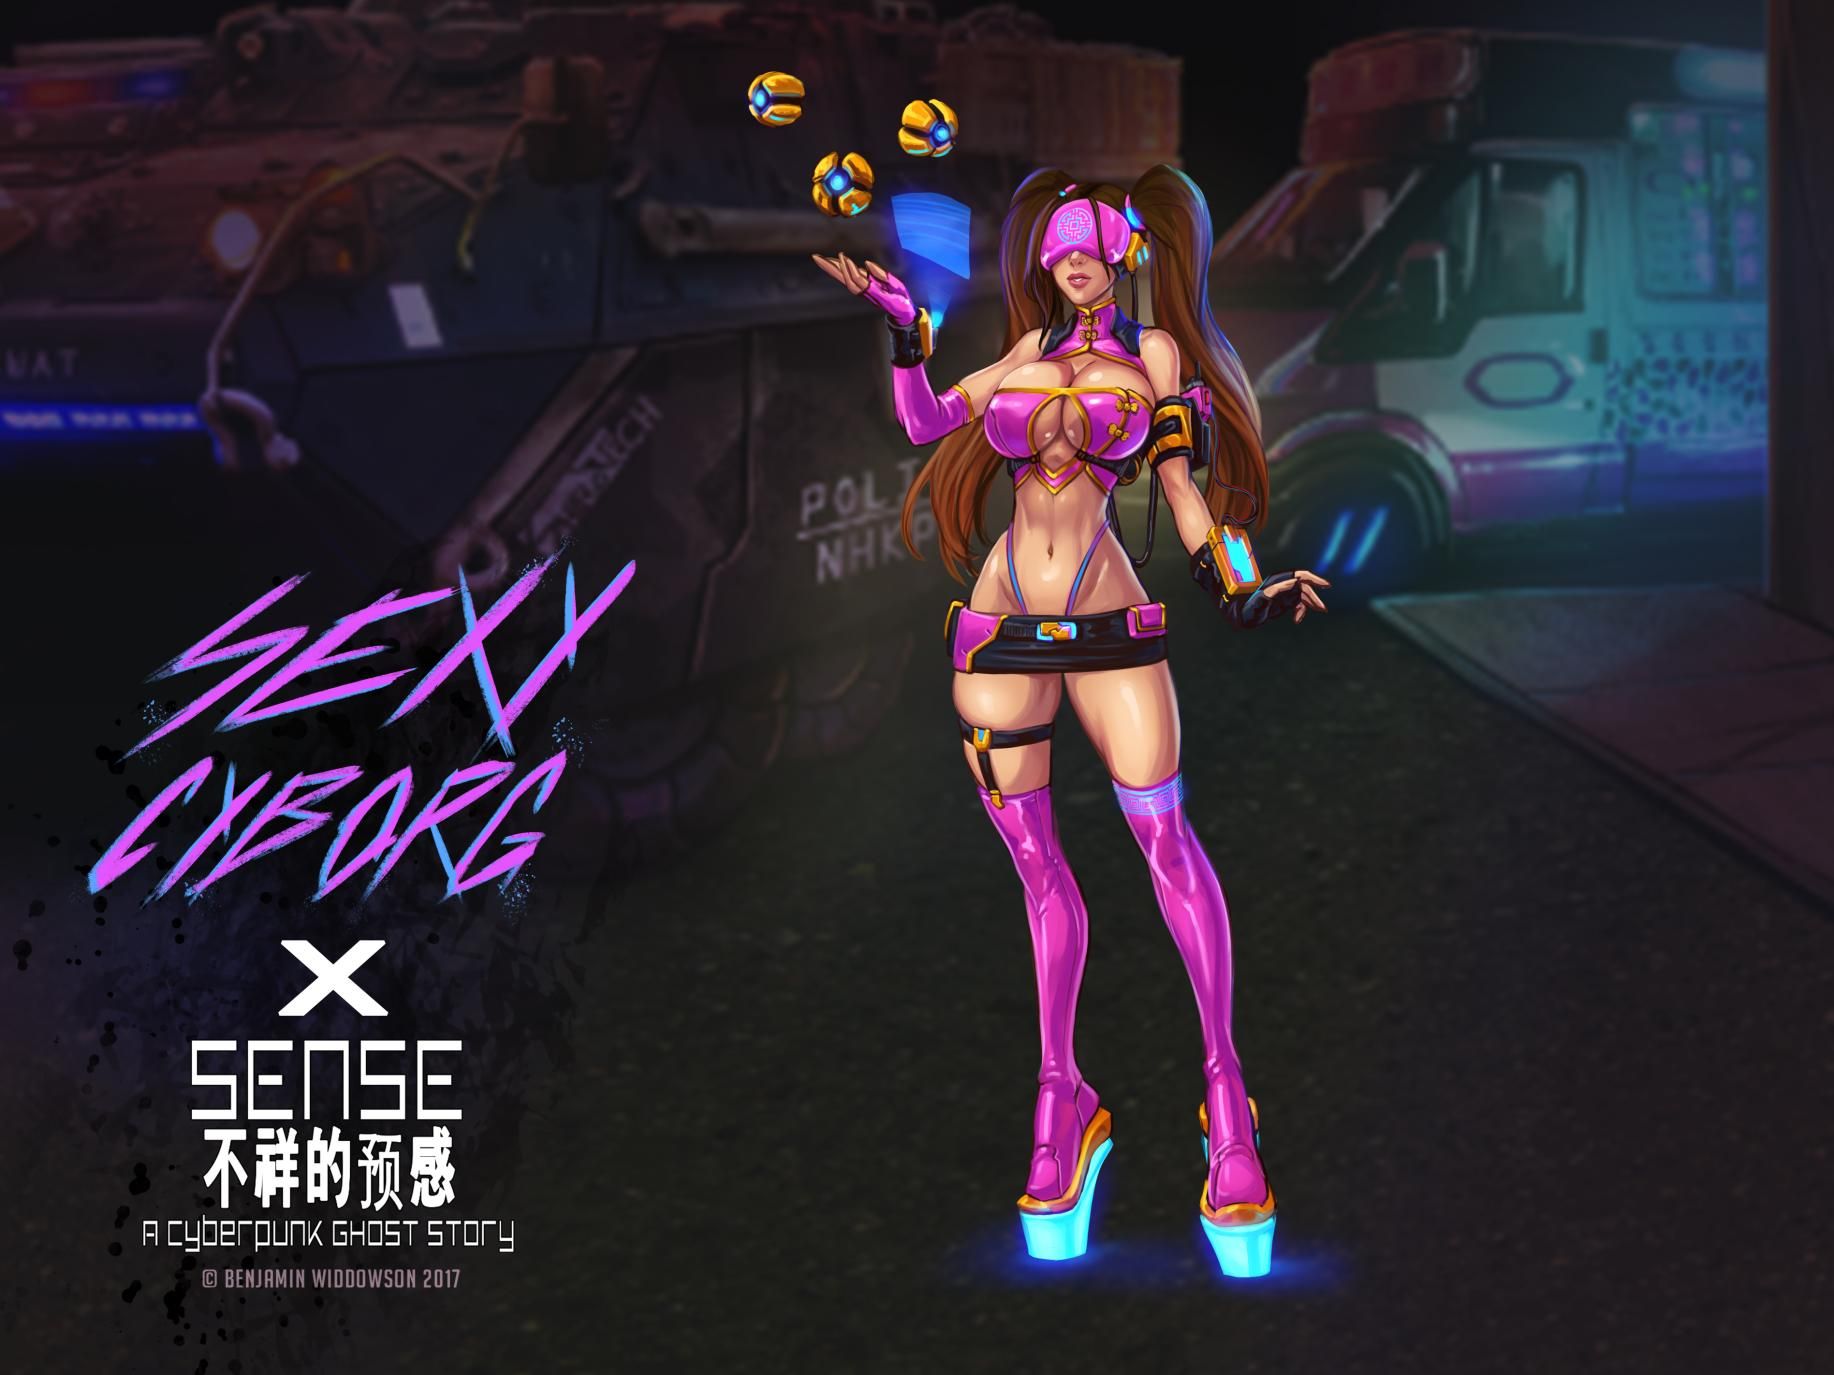 I get to be a character in Project Sense - 不祥的预感: A Cyberpunk Ghost Story. Cyberpunk, Horror game, Neon fashion